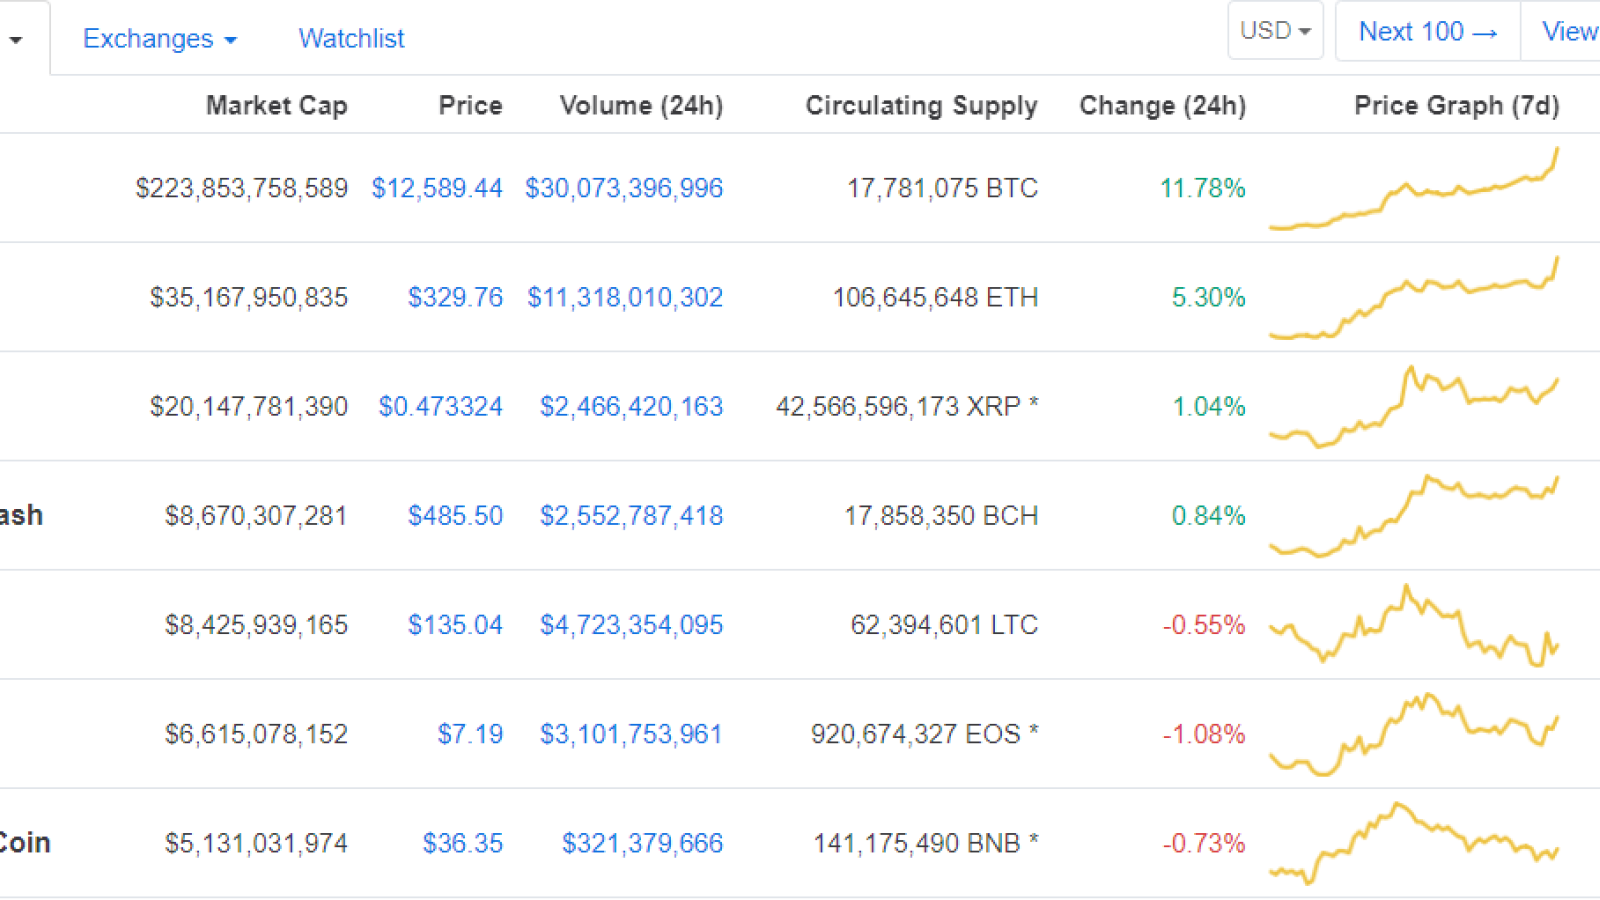 The top 7 coins by market capitalization 